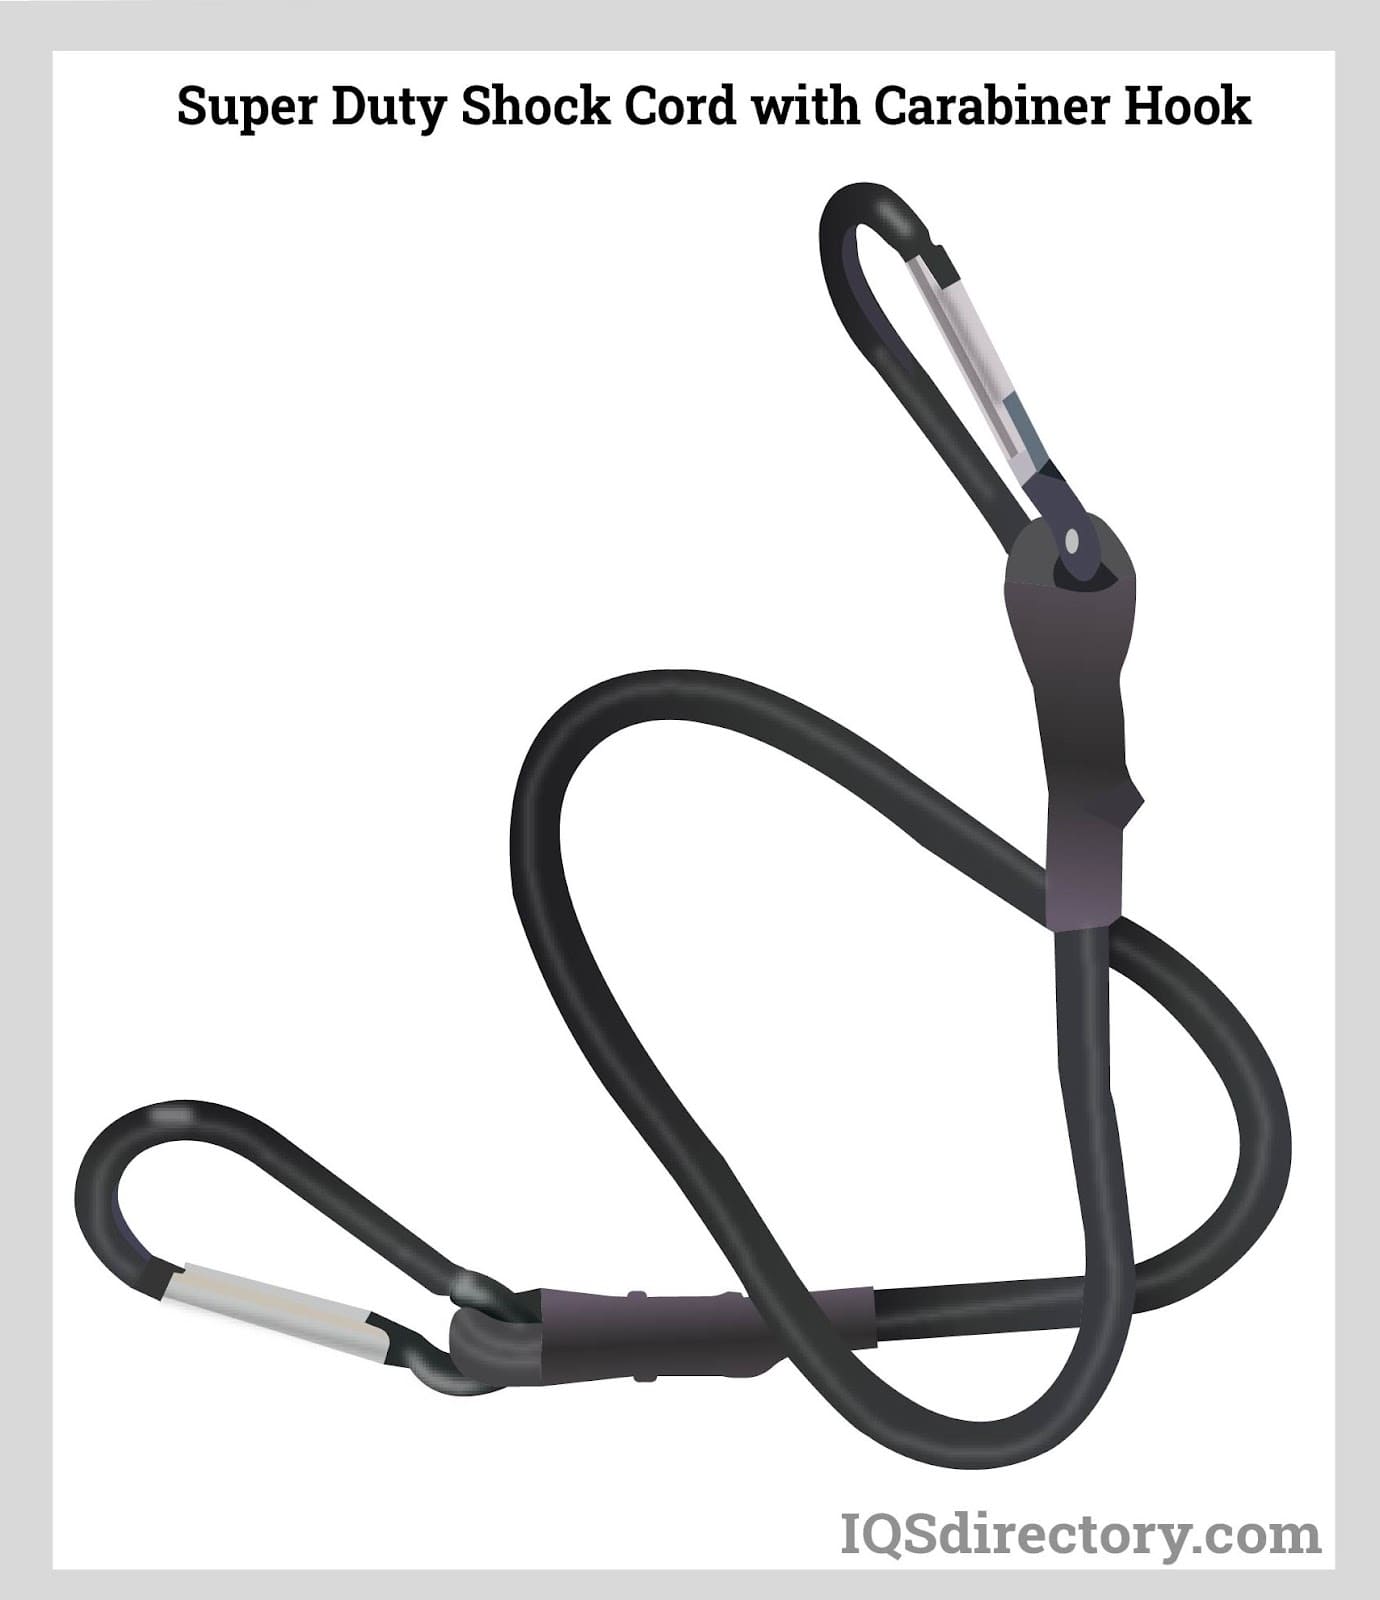 Super Duty Shock Cord with Carabiner Hook